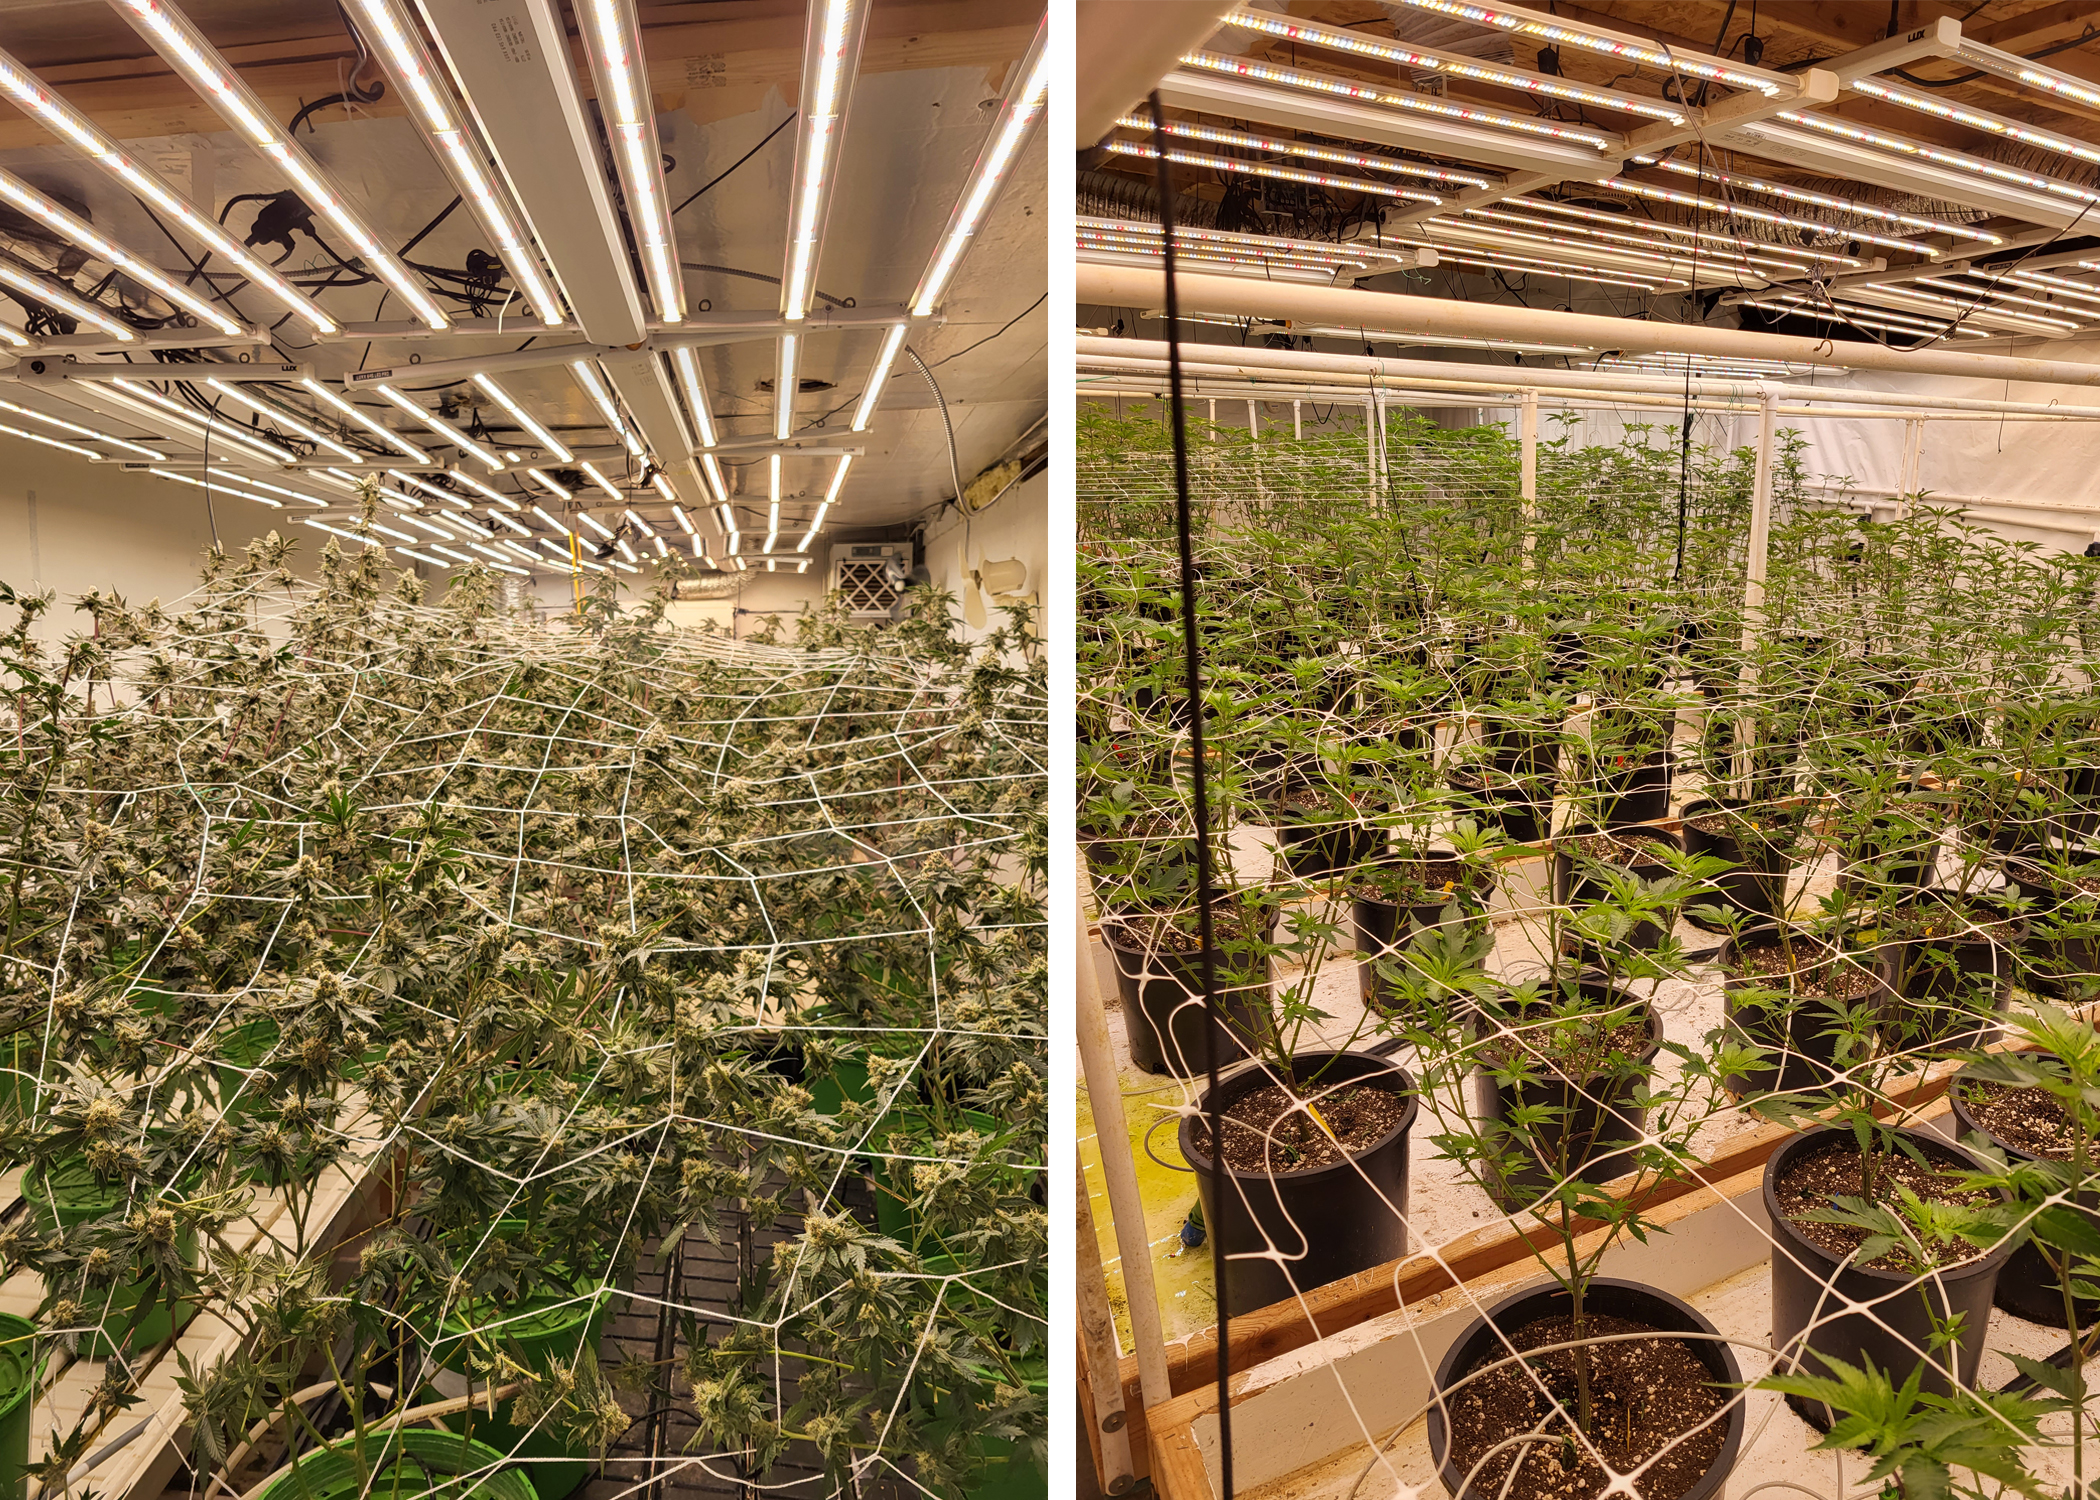 Image 1: Two photos showing rooms filled with numerous marijuana plants in various stages of growth